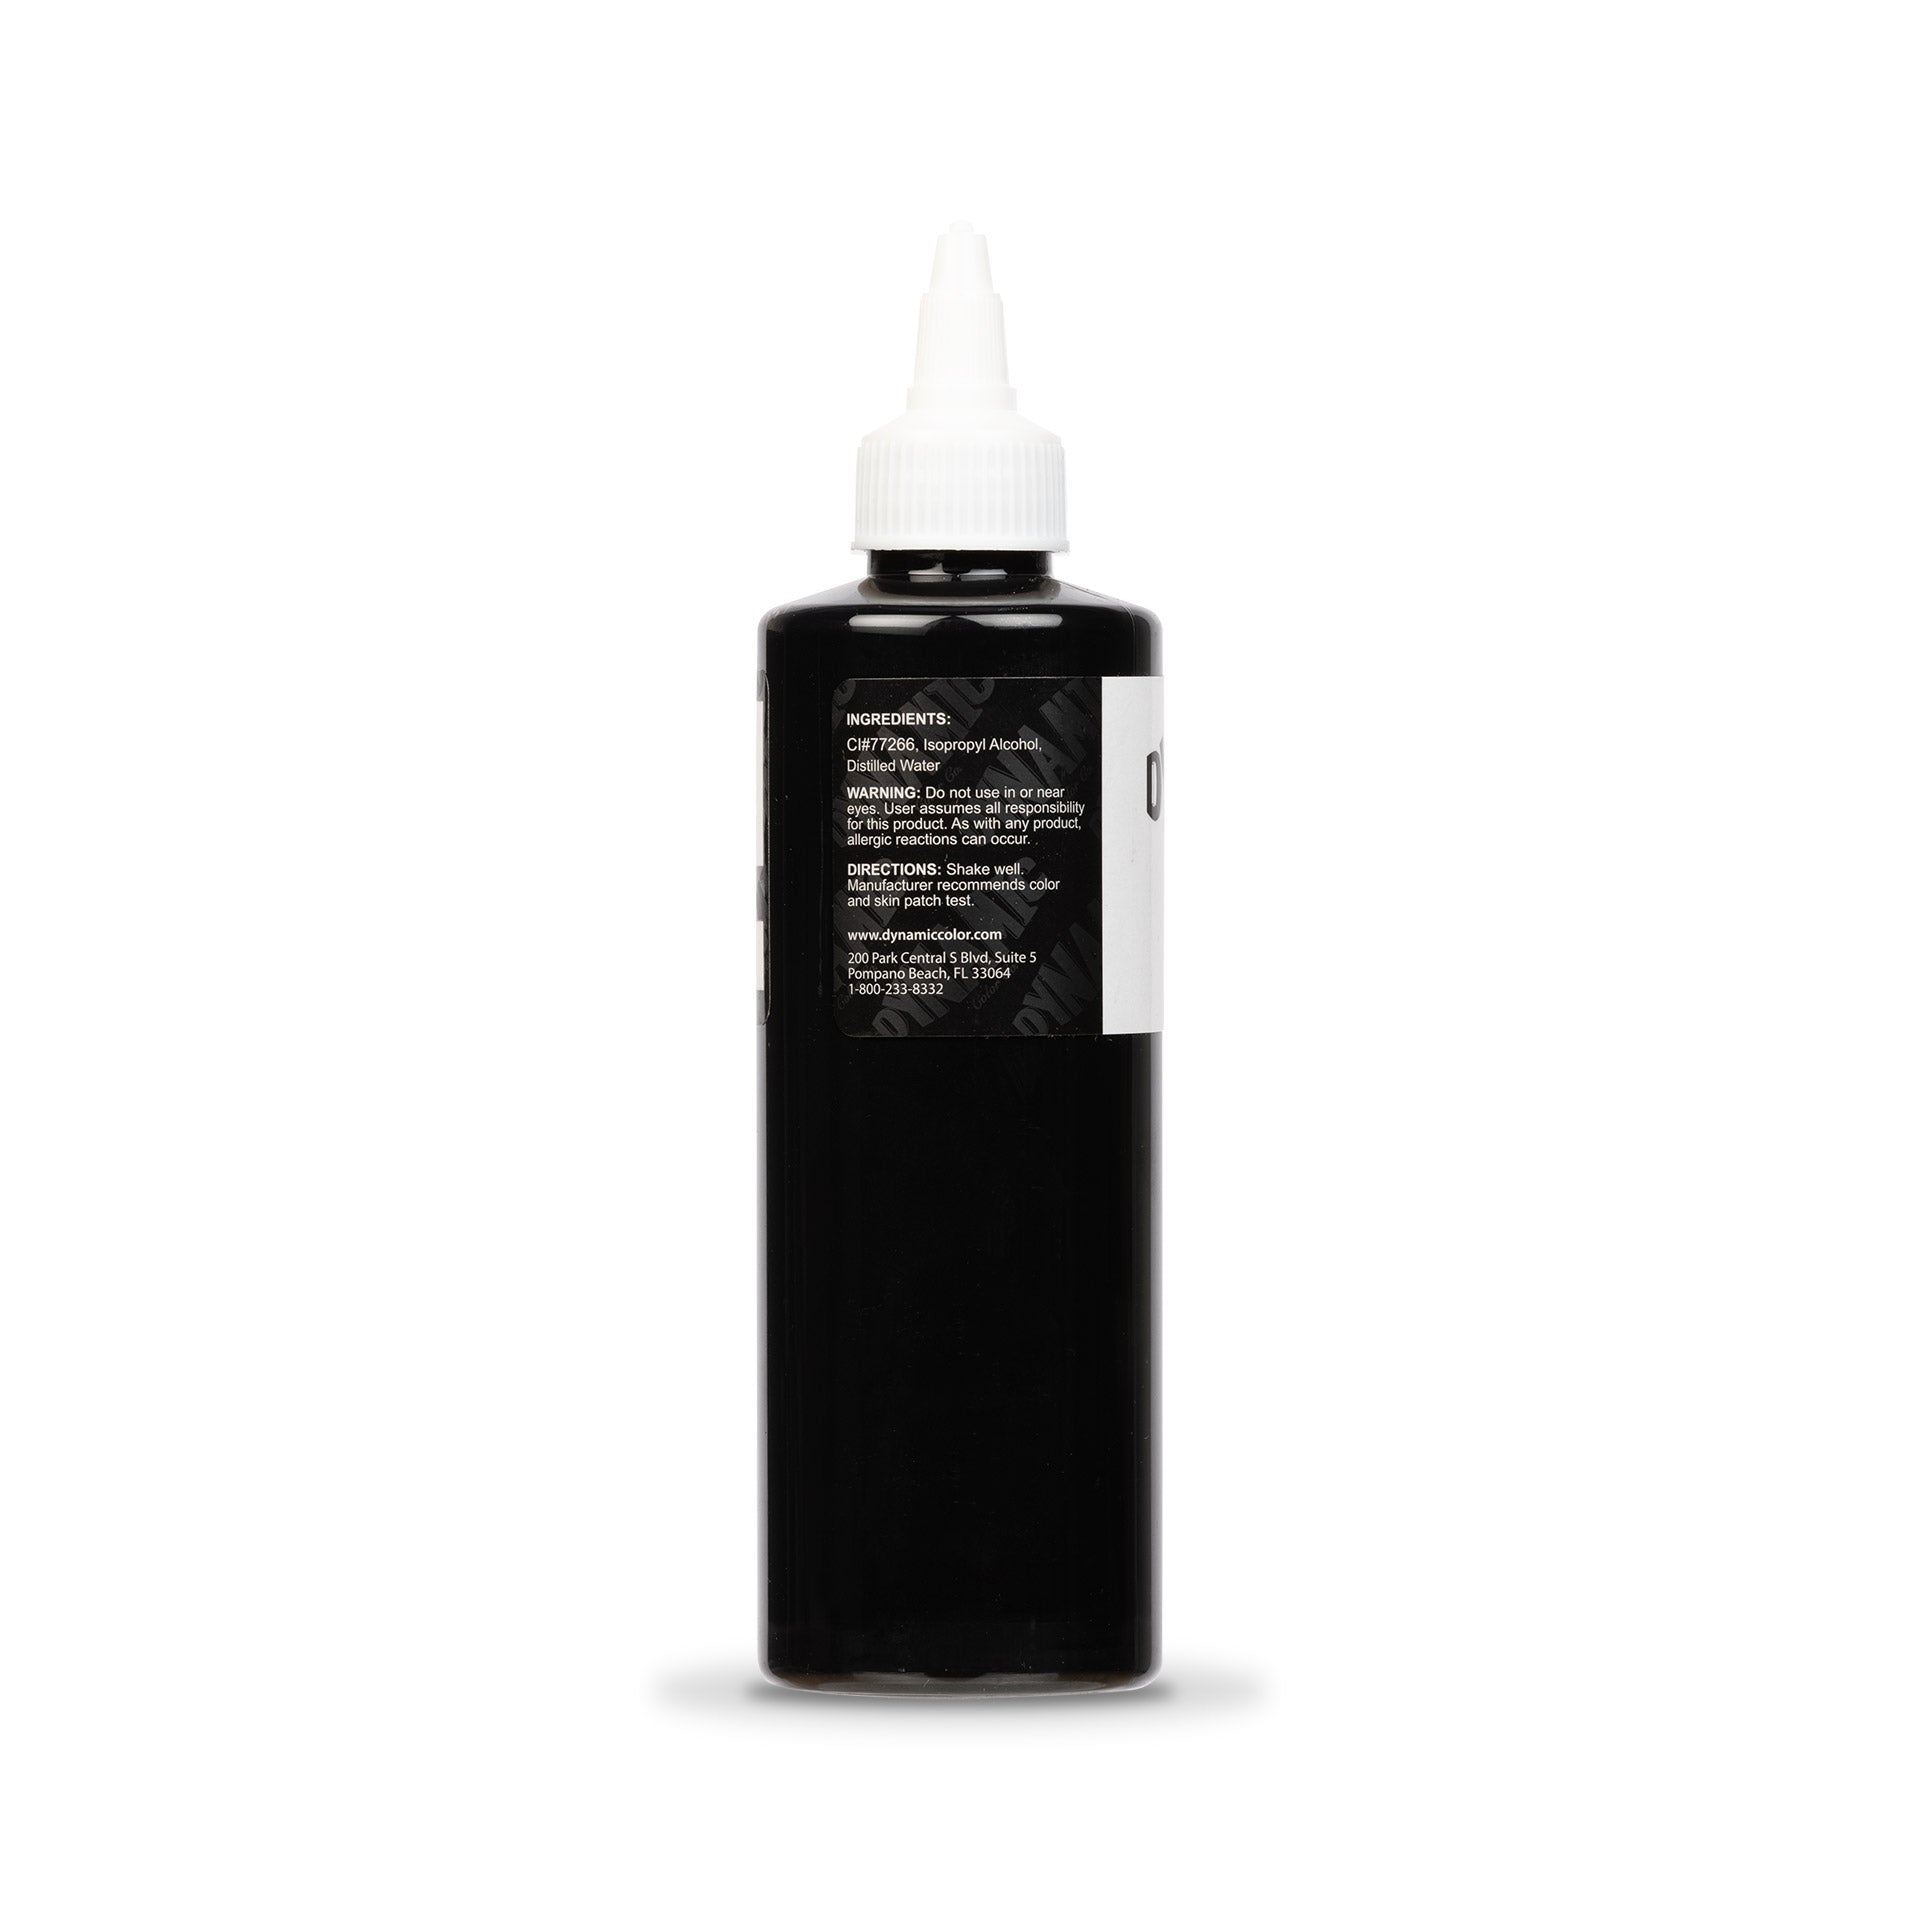 Dynamic Black Tattoo Ink - Premium Tattoo Ink Great for lining, Shading, Tribal, and Blending - Made in USA - 8 Ounce Bottle